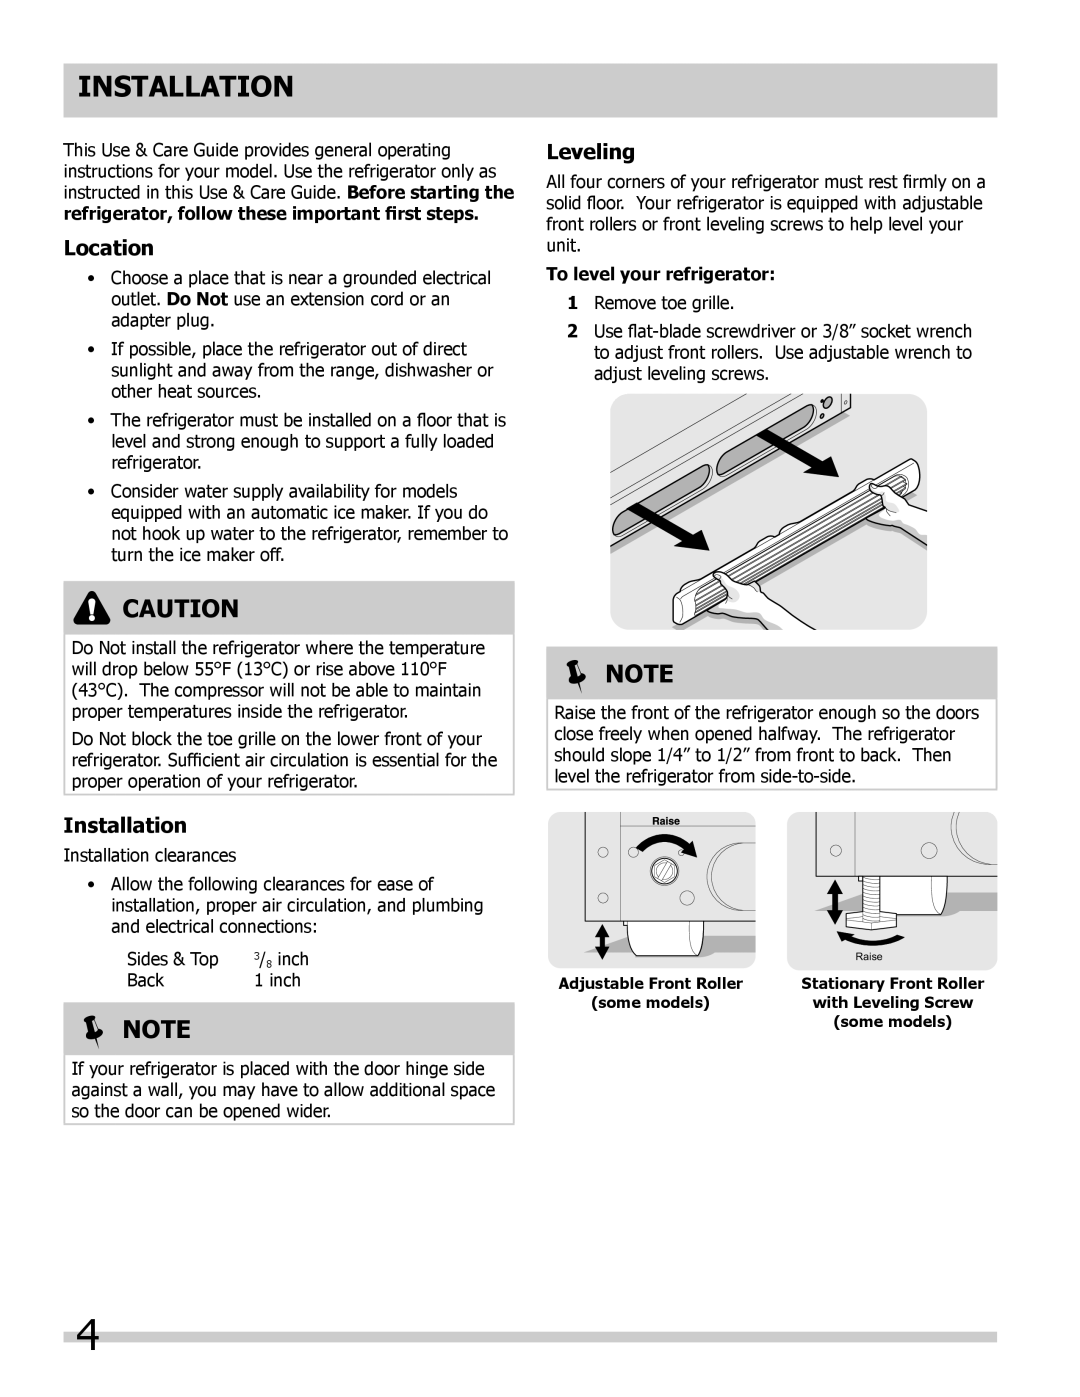 Frigidaire 242008000 manual Installation,  Note, Location, To level your refrigerator, Leveling 